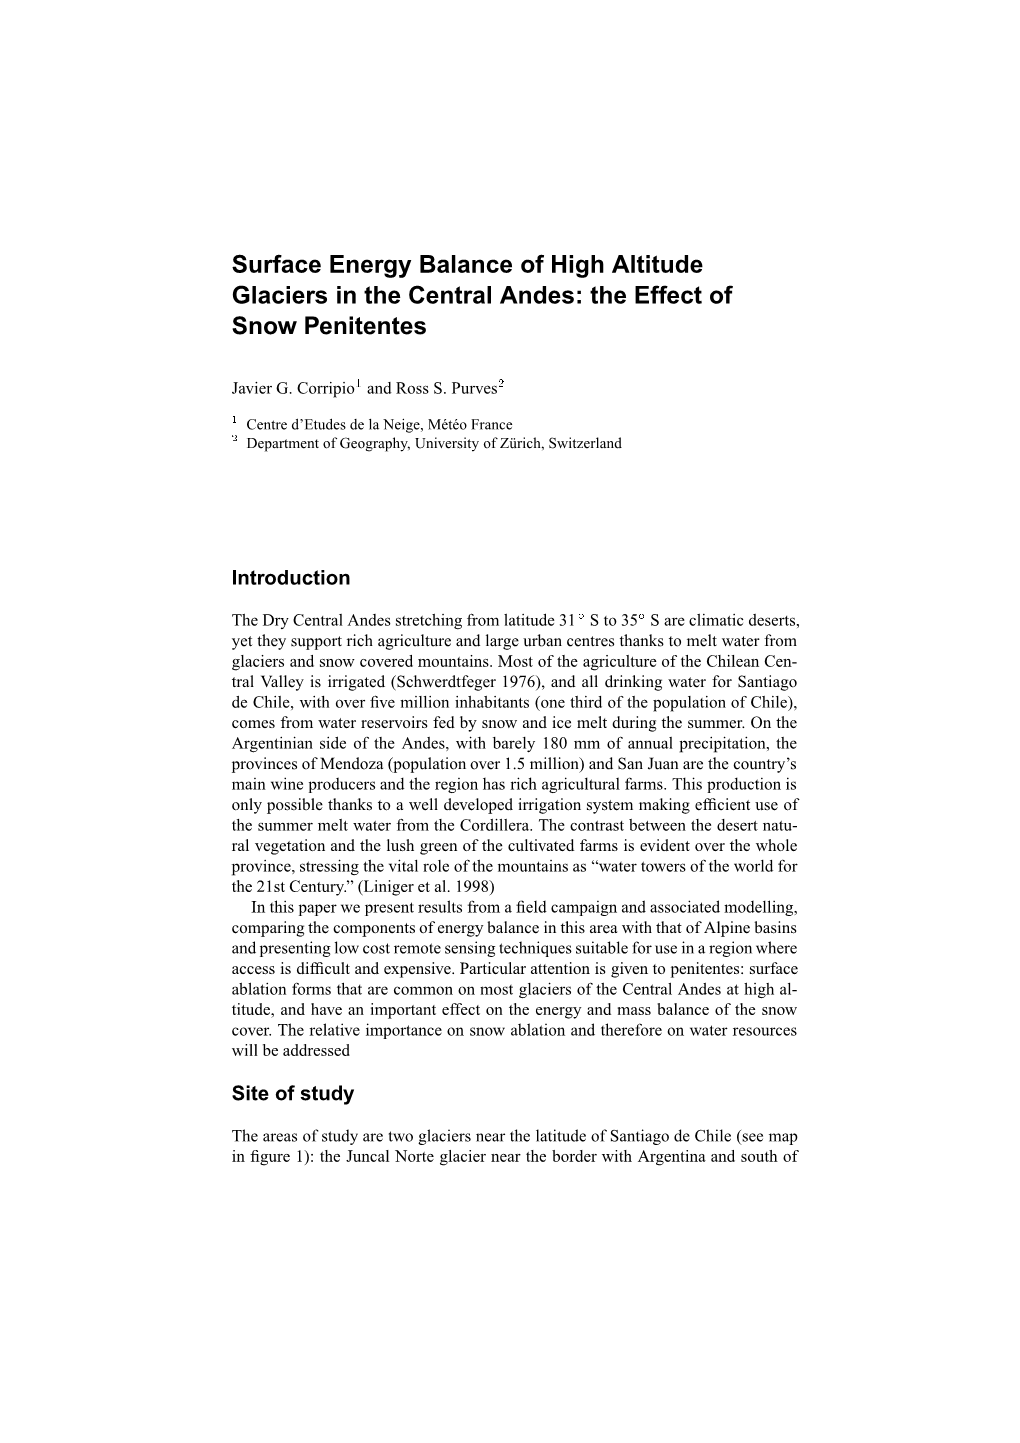 Surface Energy Balance of High Altitude Glaciers in the Central Andes: the Effect Of